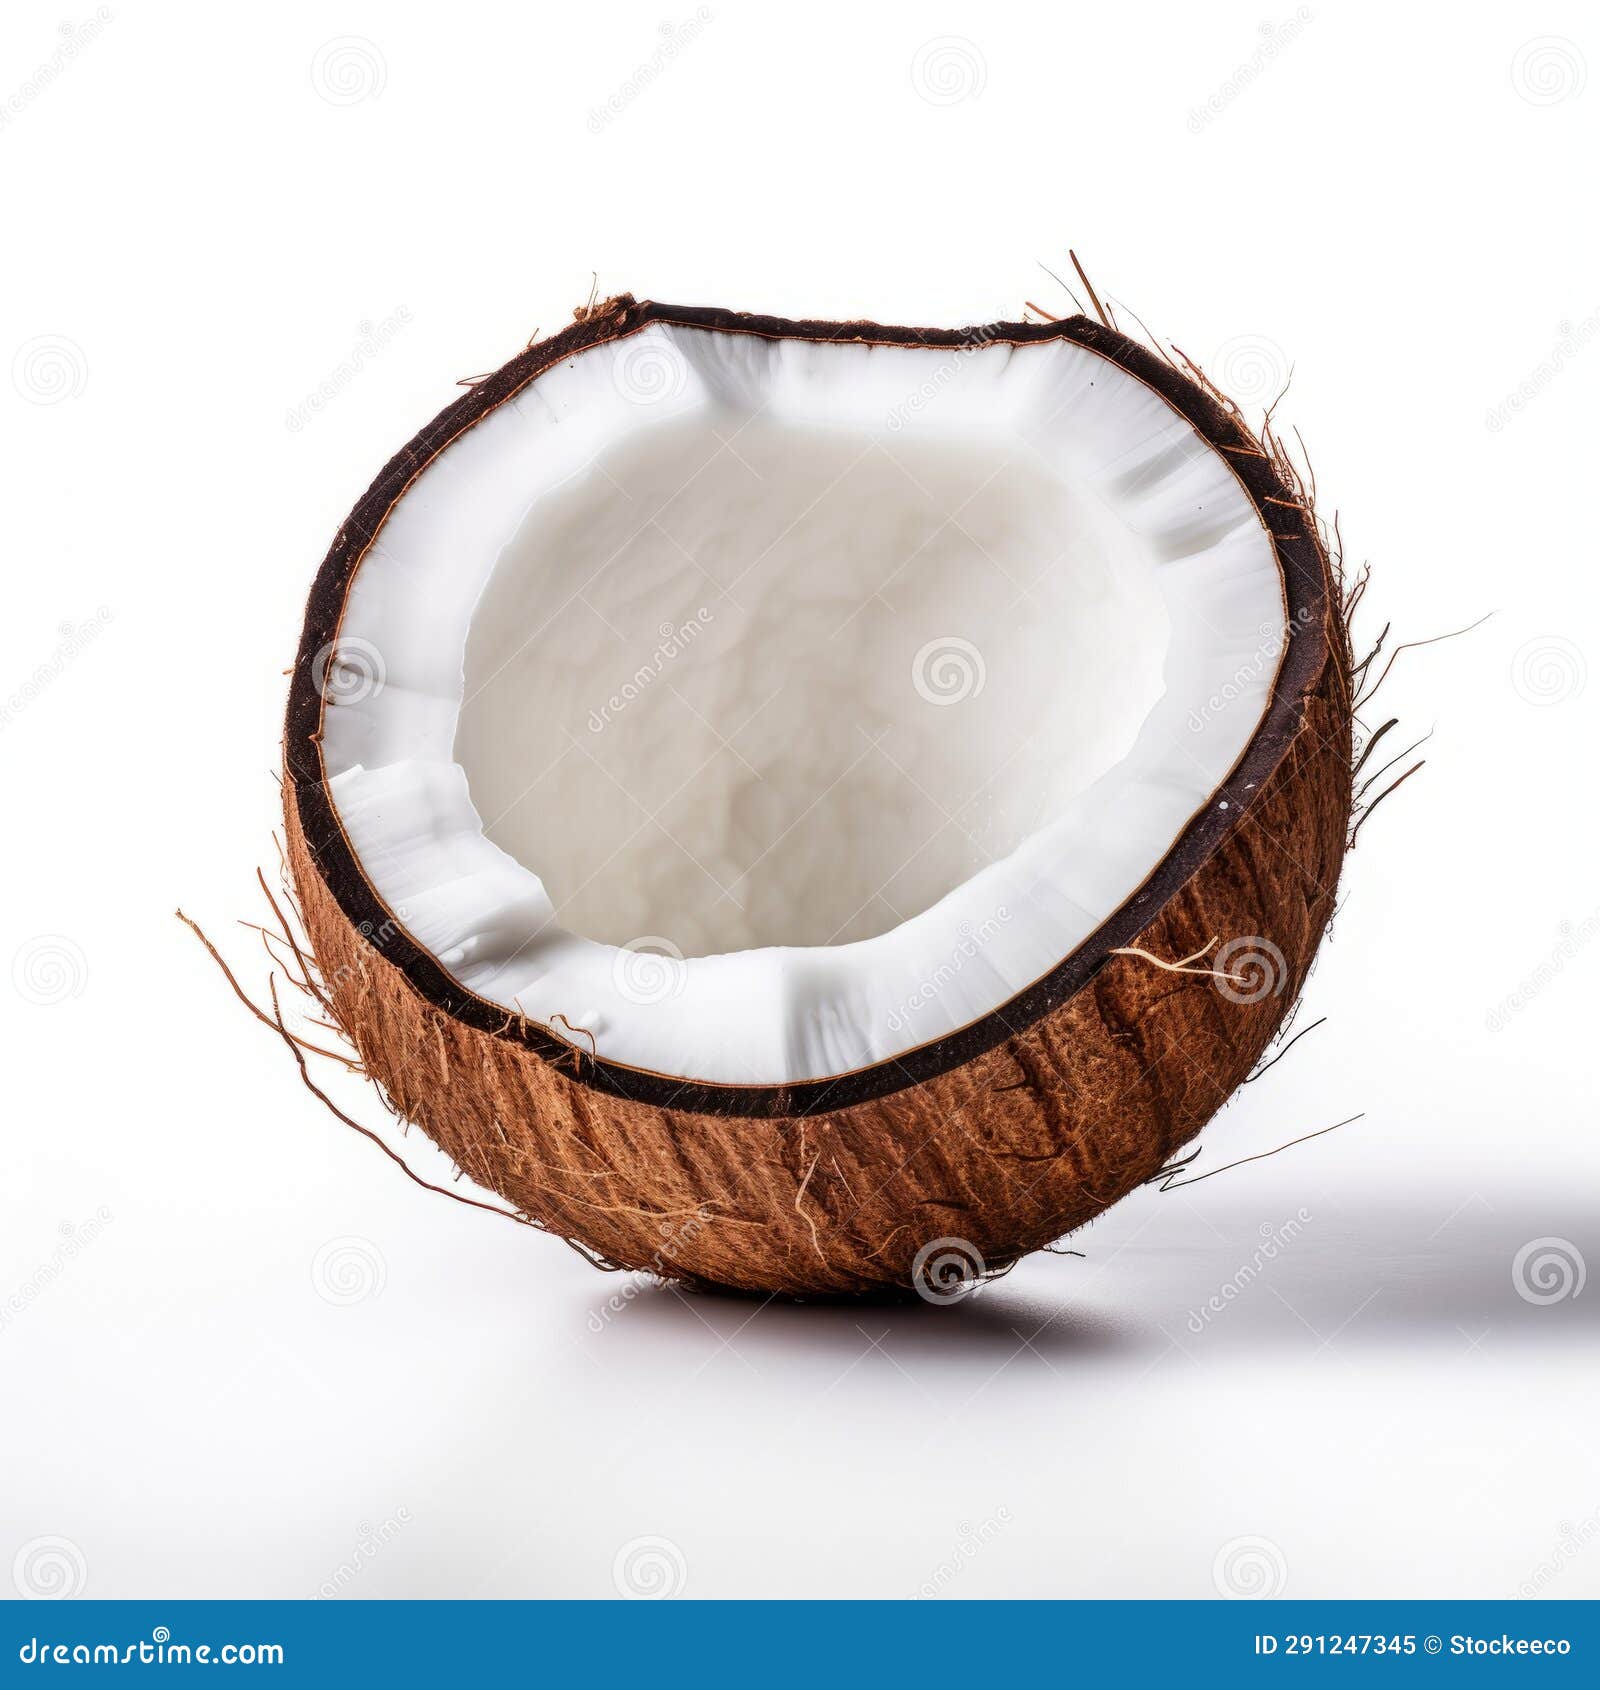 Coconut Product Photography: Focus Stacked, Smooth and Polished Coconut ...